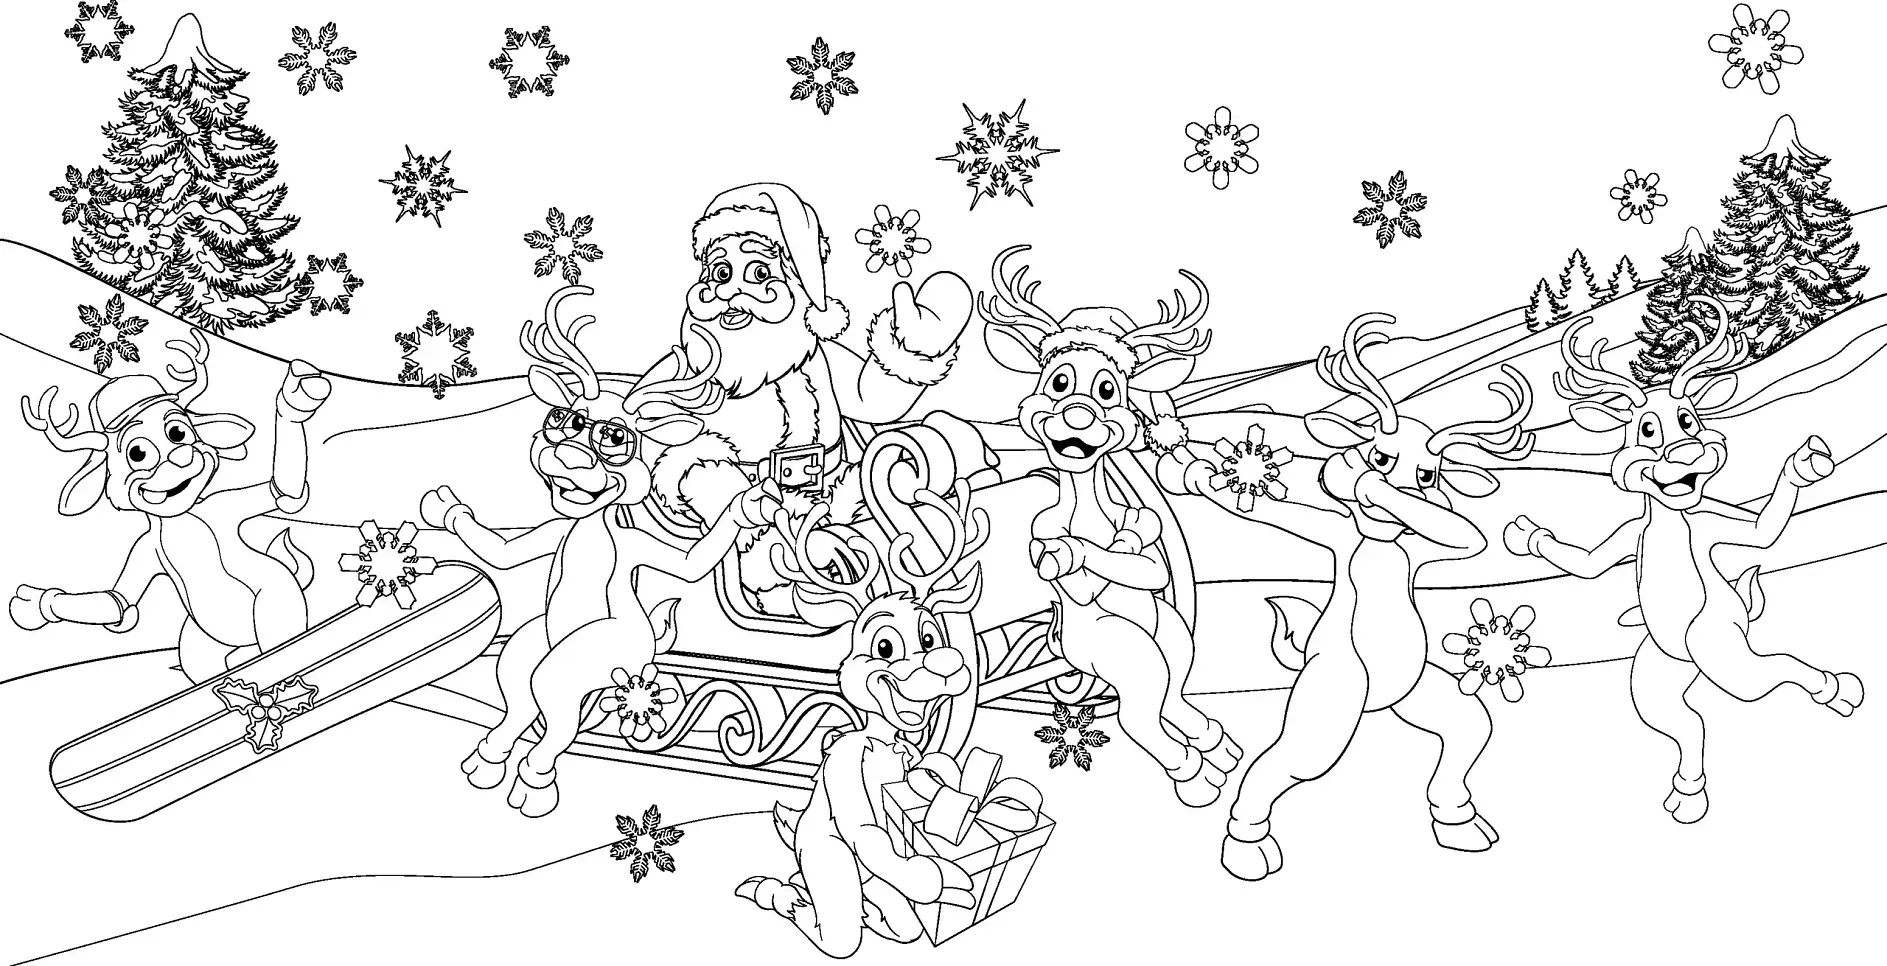 Christmas coloring book page scene of Santa Claus sled or sleigh surrounded by reindeer having fun